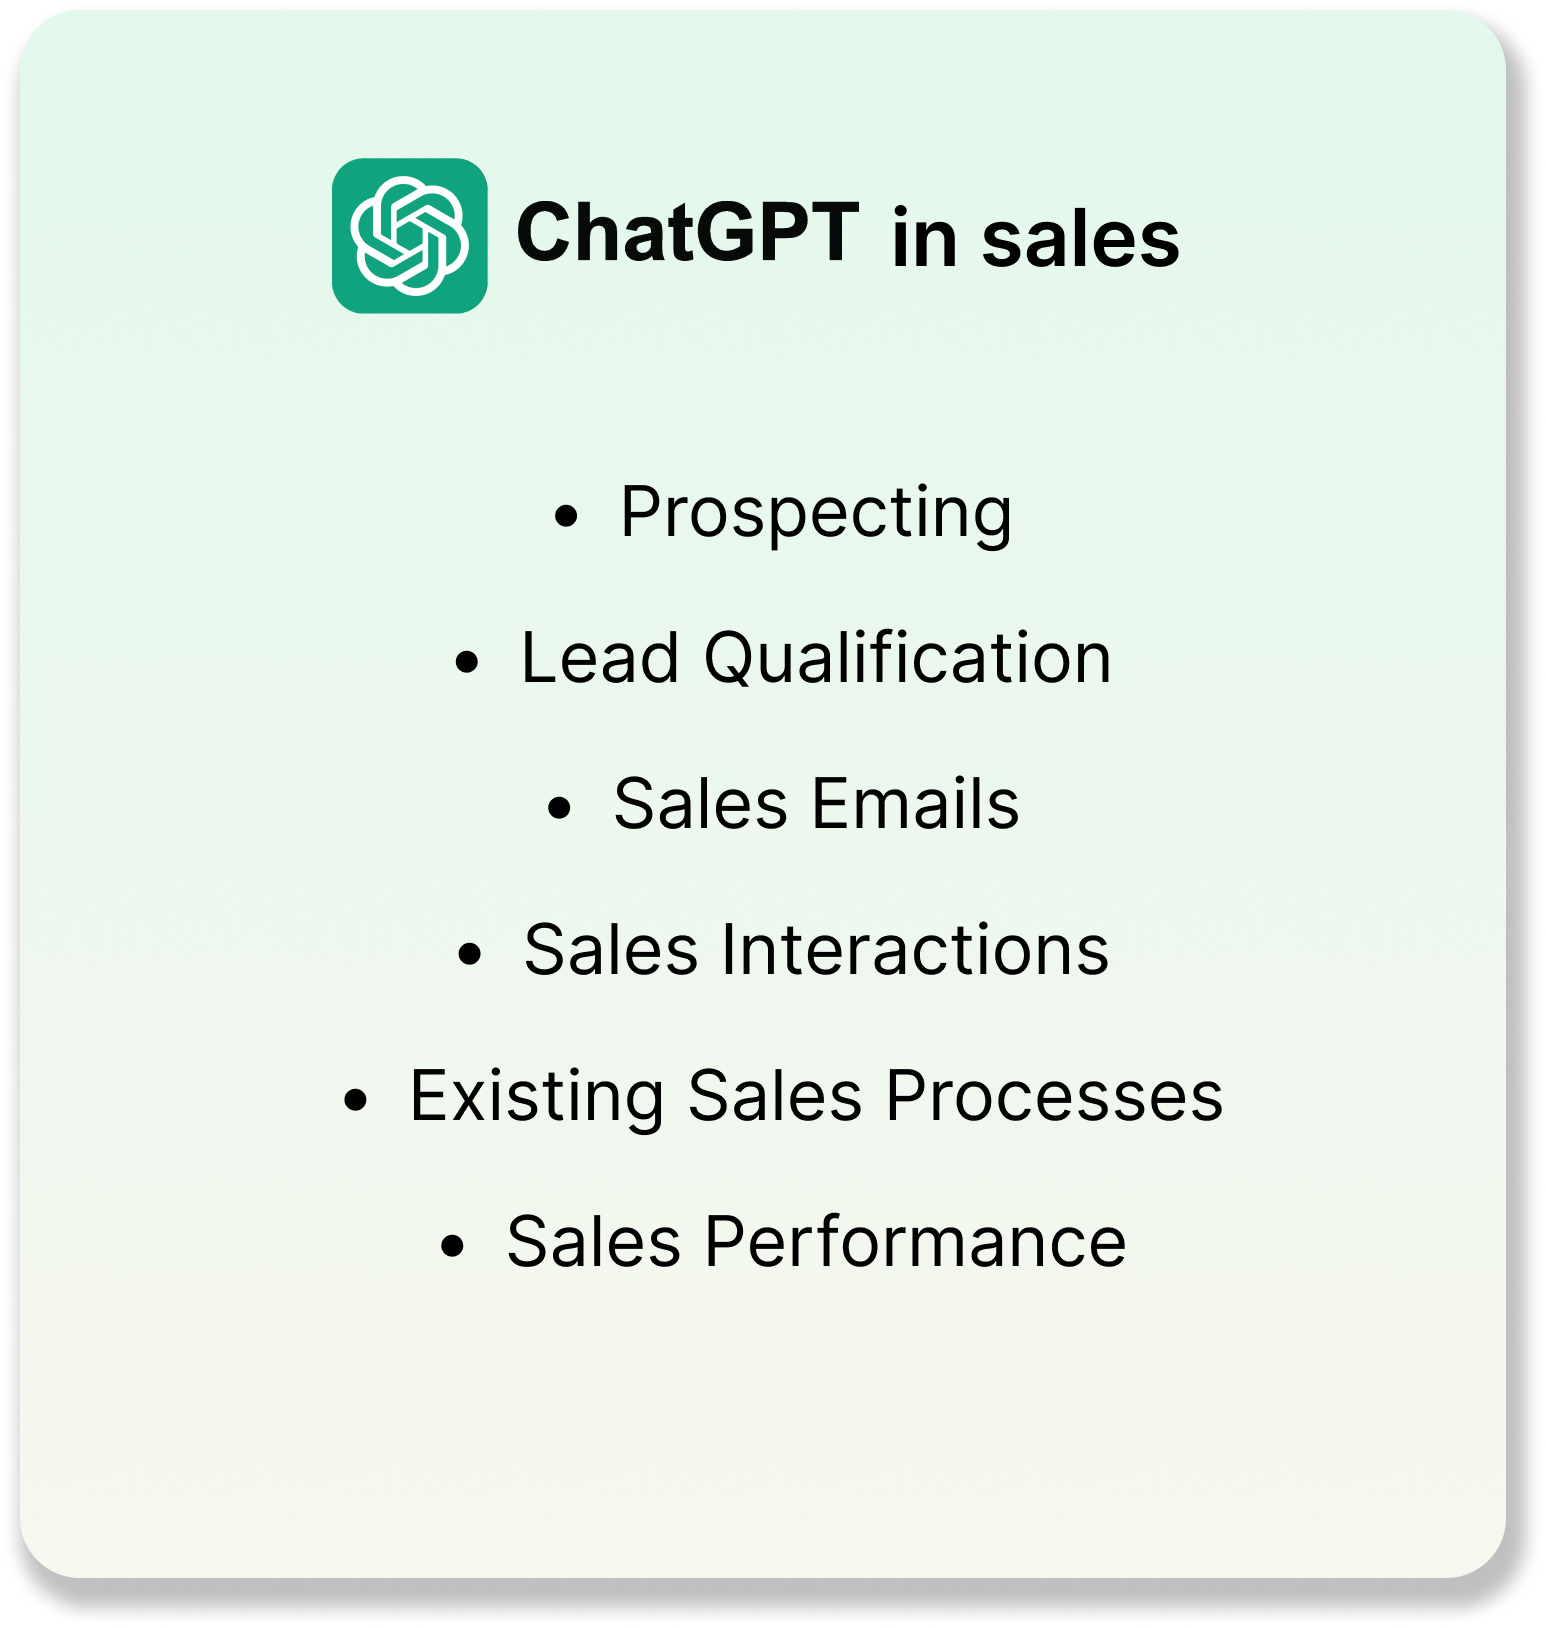 chatgpt in sales